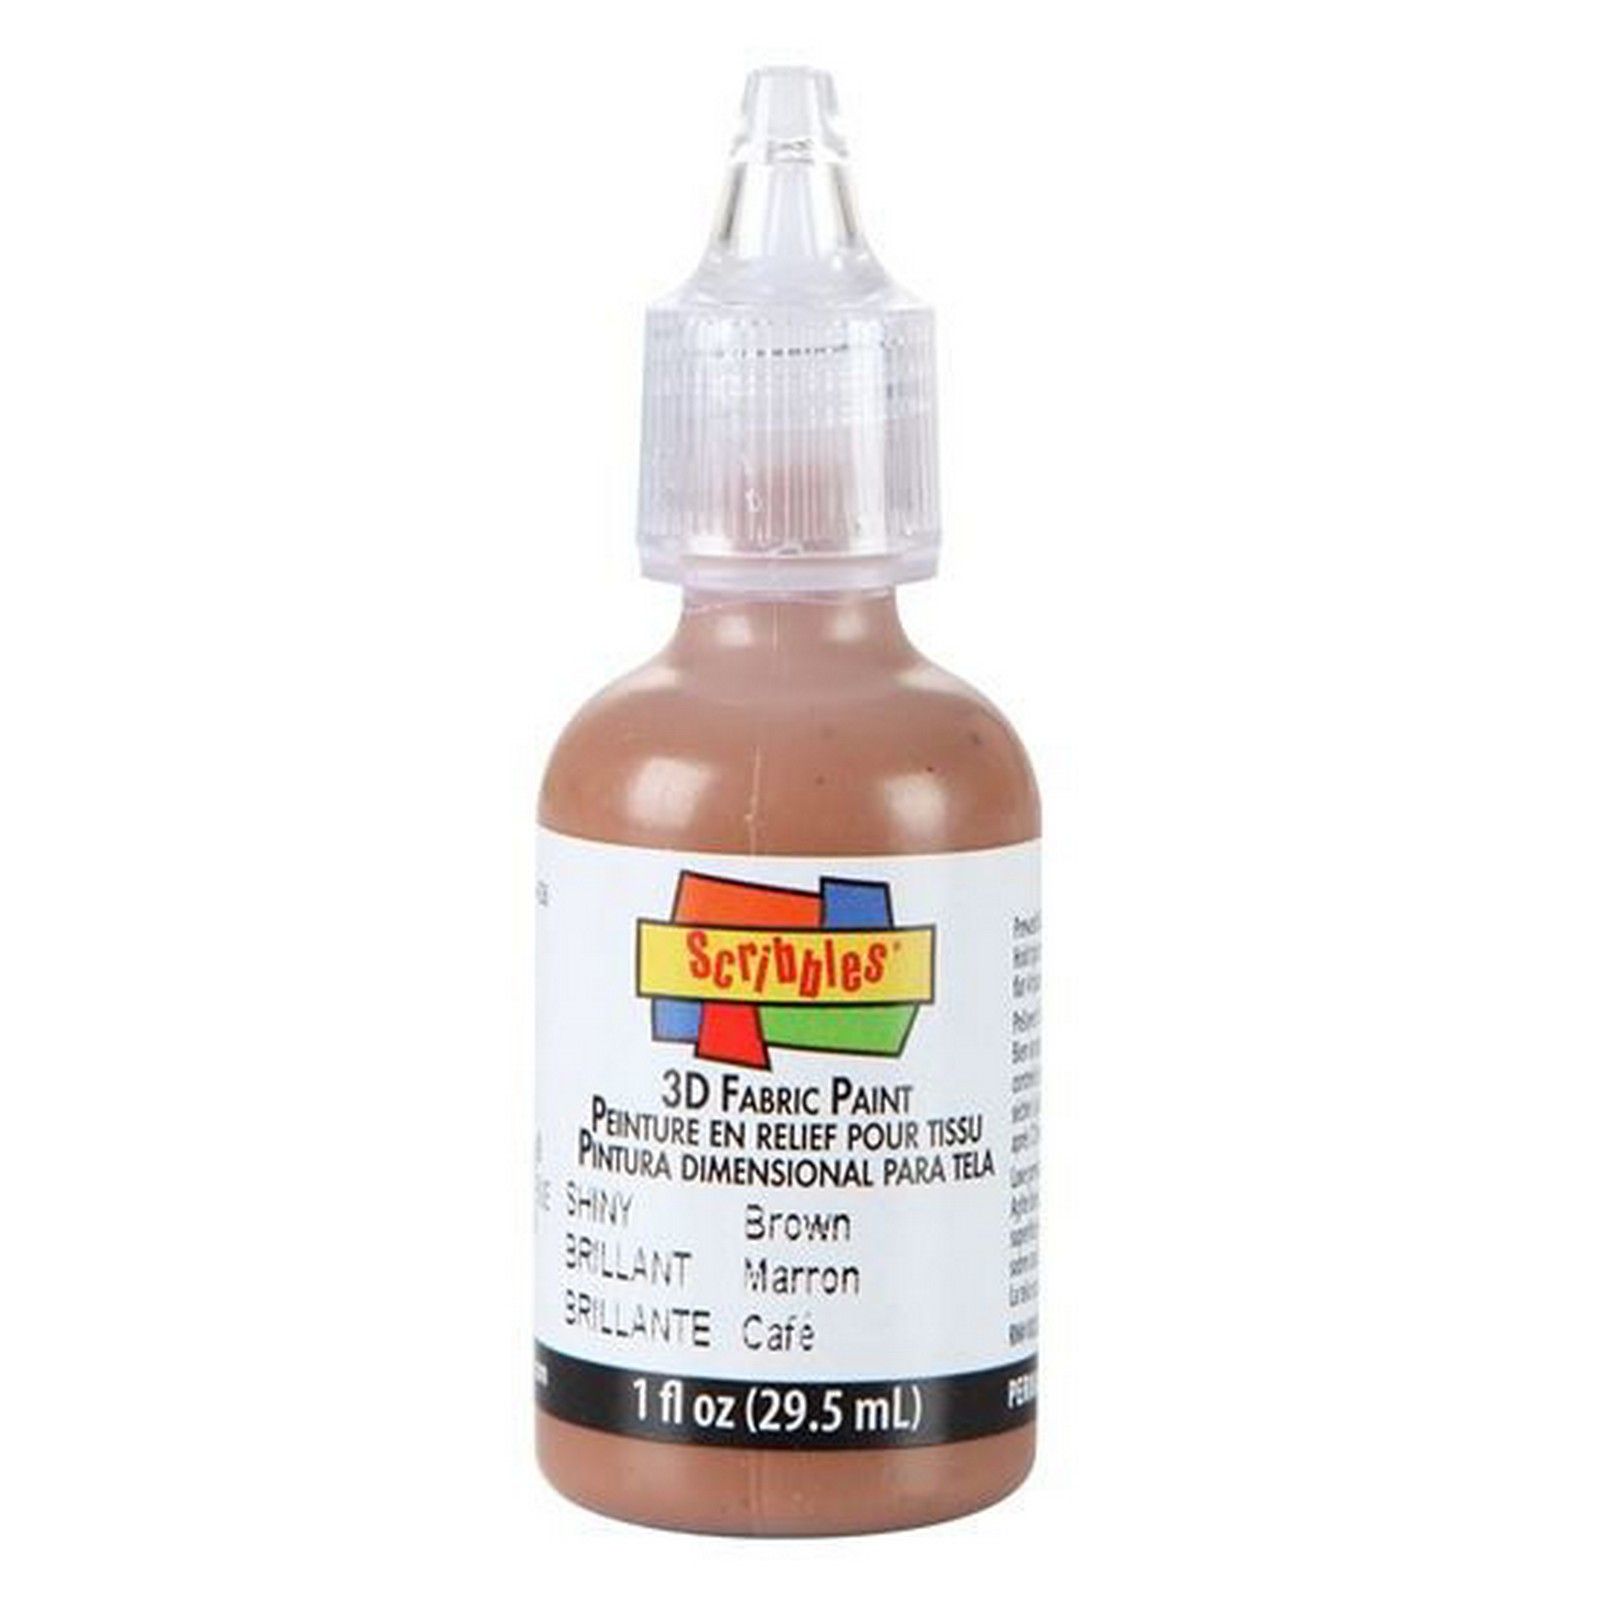 Scribbles • 3D Fabric Paint Shiny 29.5ml Brown